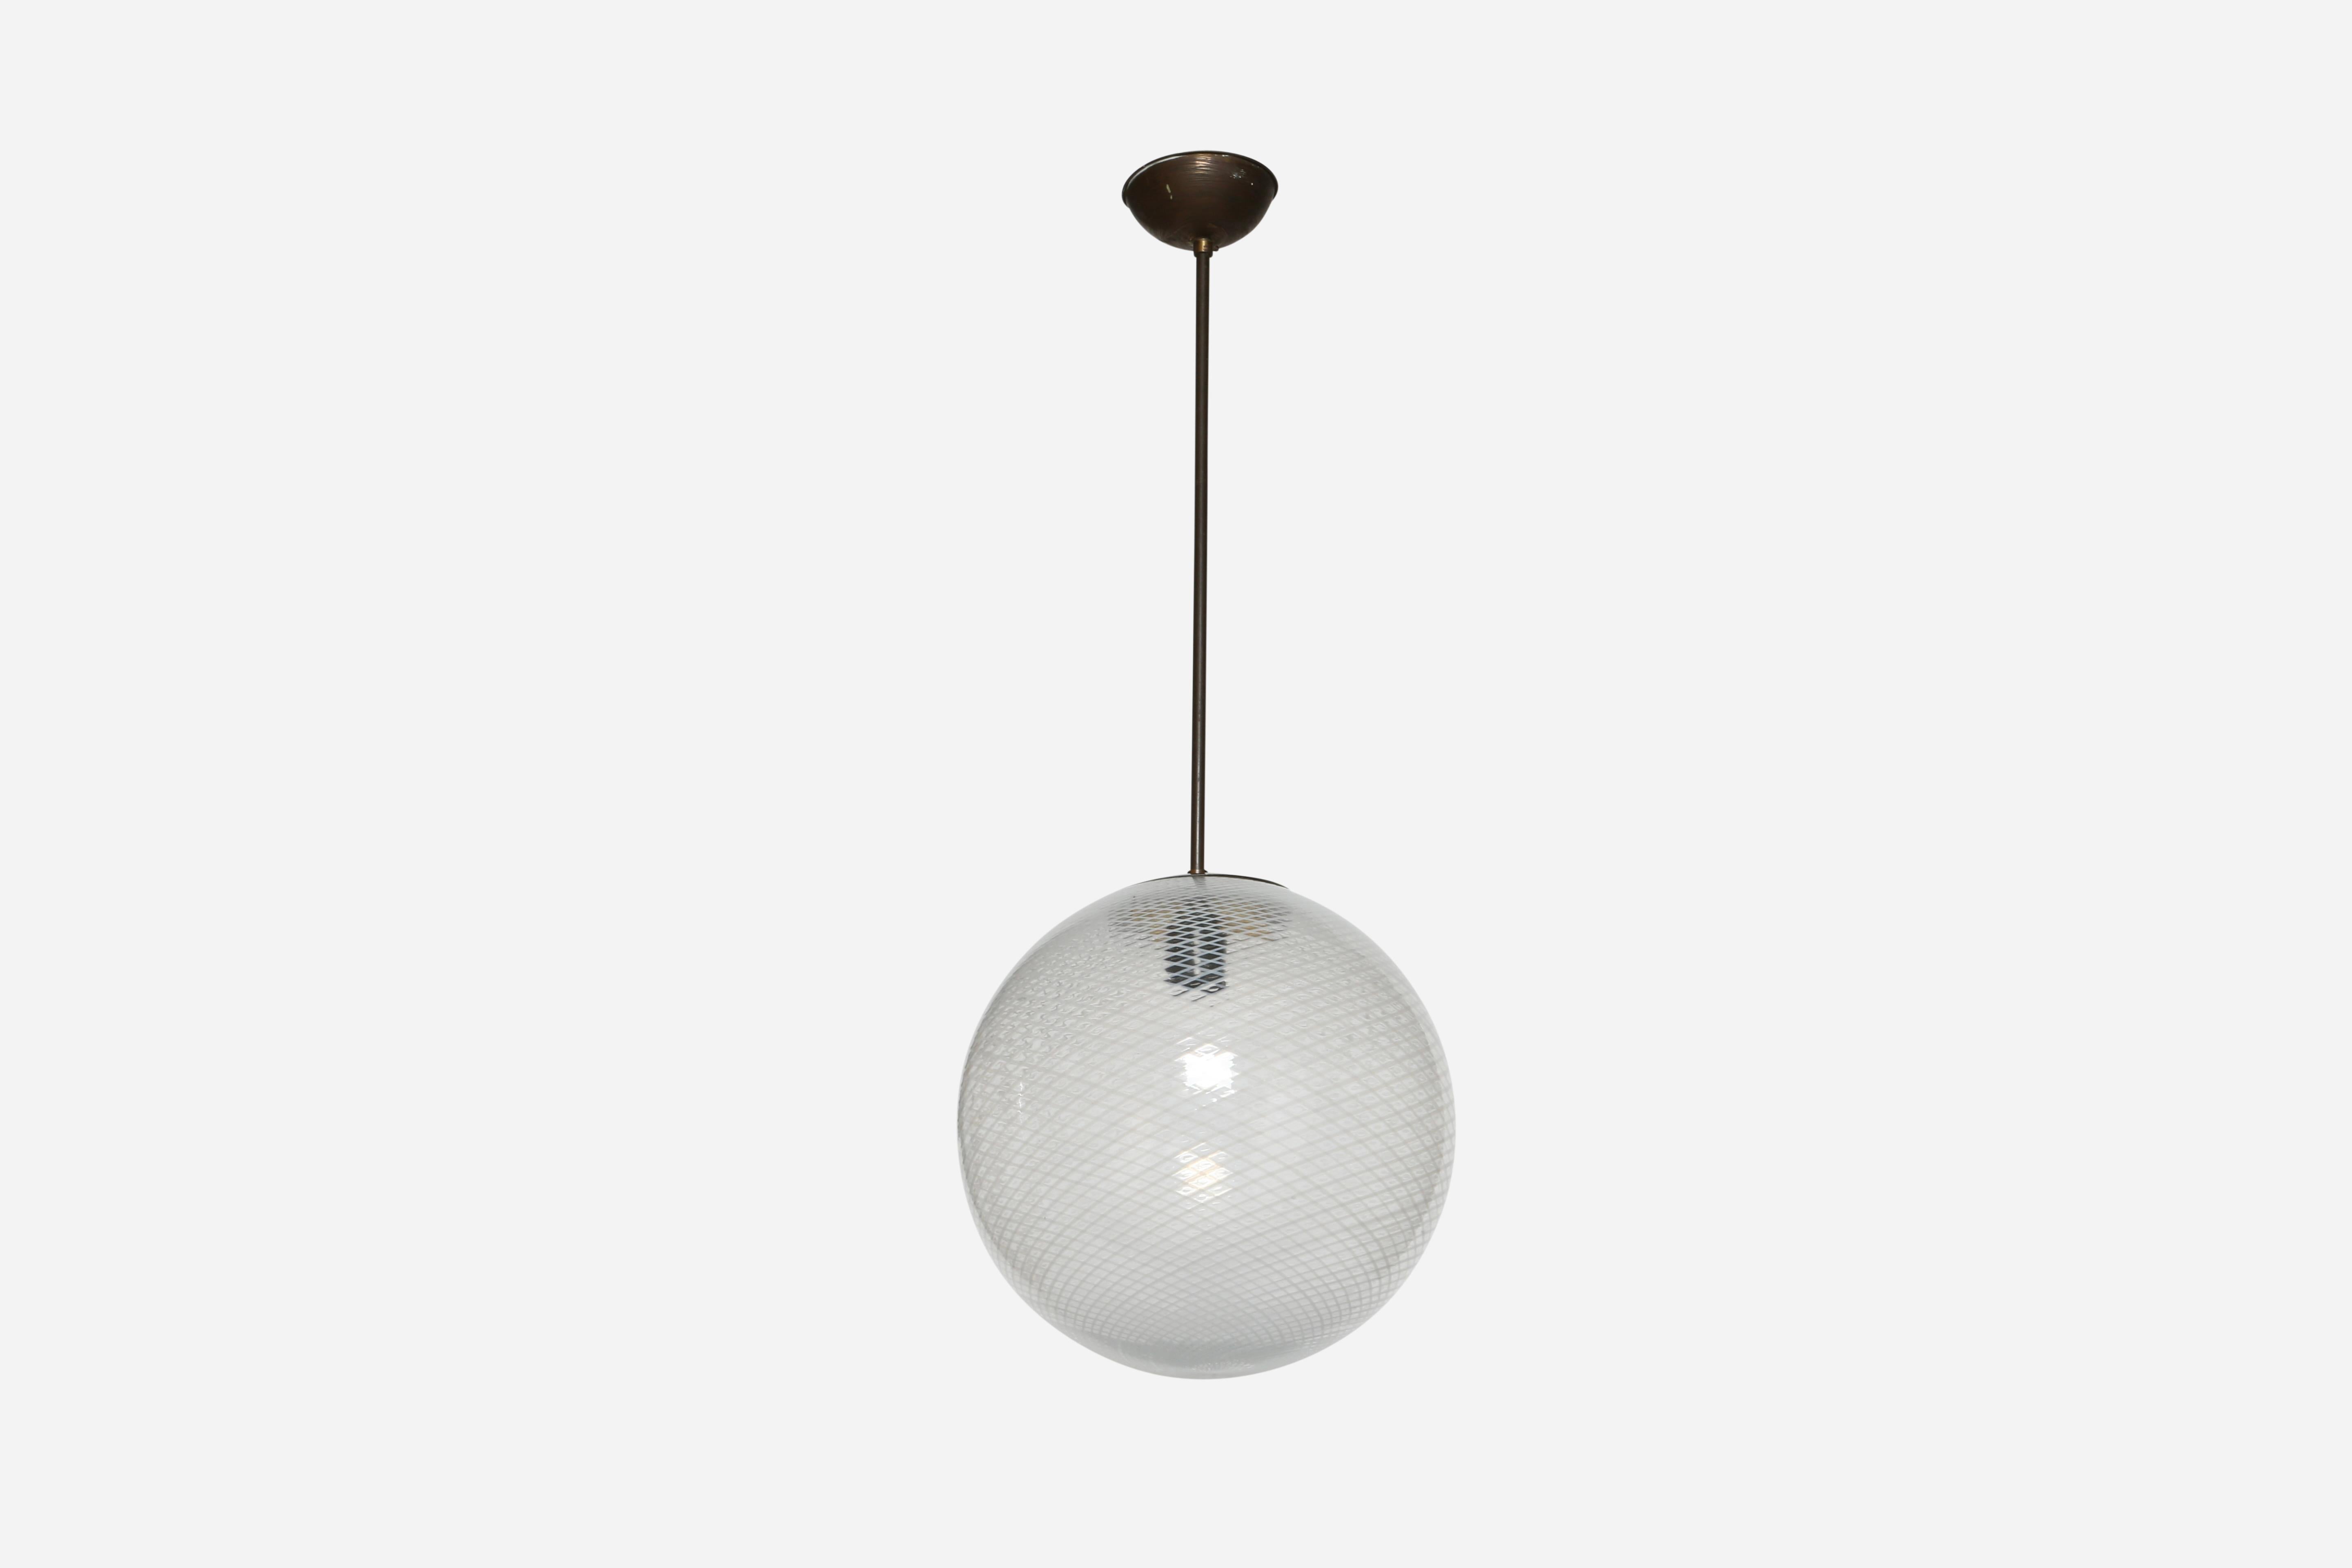 Carlo Scarpa for Venini ceiling light
Model 5258
Italy 1940s
Handblown glass, steel, aluminum.
Exquisite glass making technique.
Takes one medium base bulb.
Complimentary US rewiring with a custom made ceiling plate upon request.